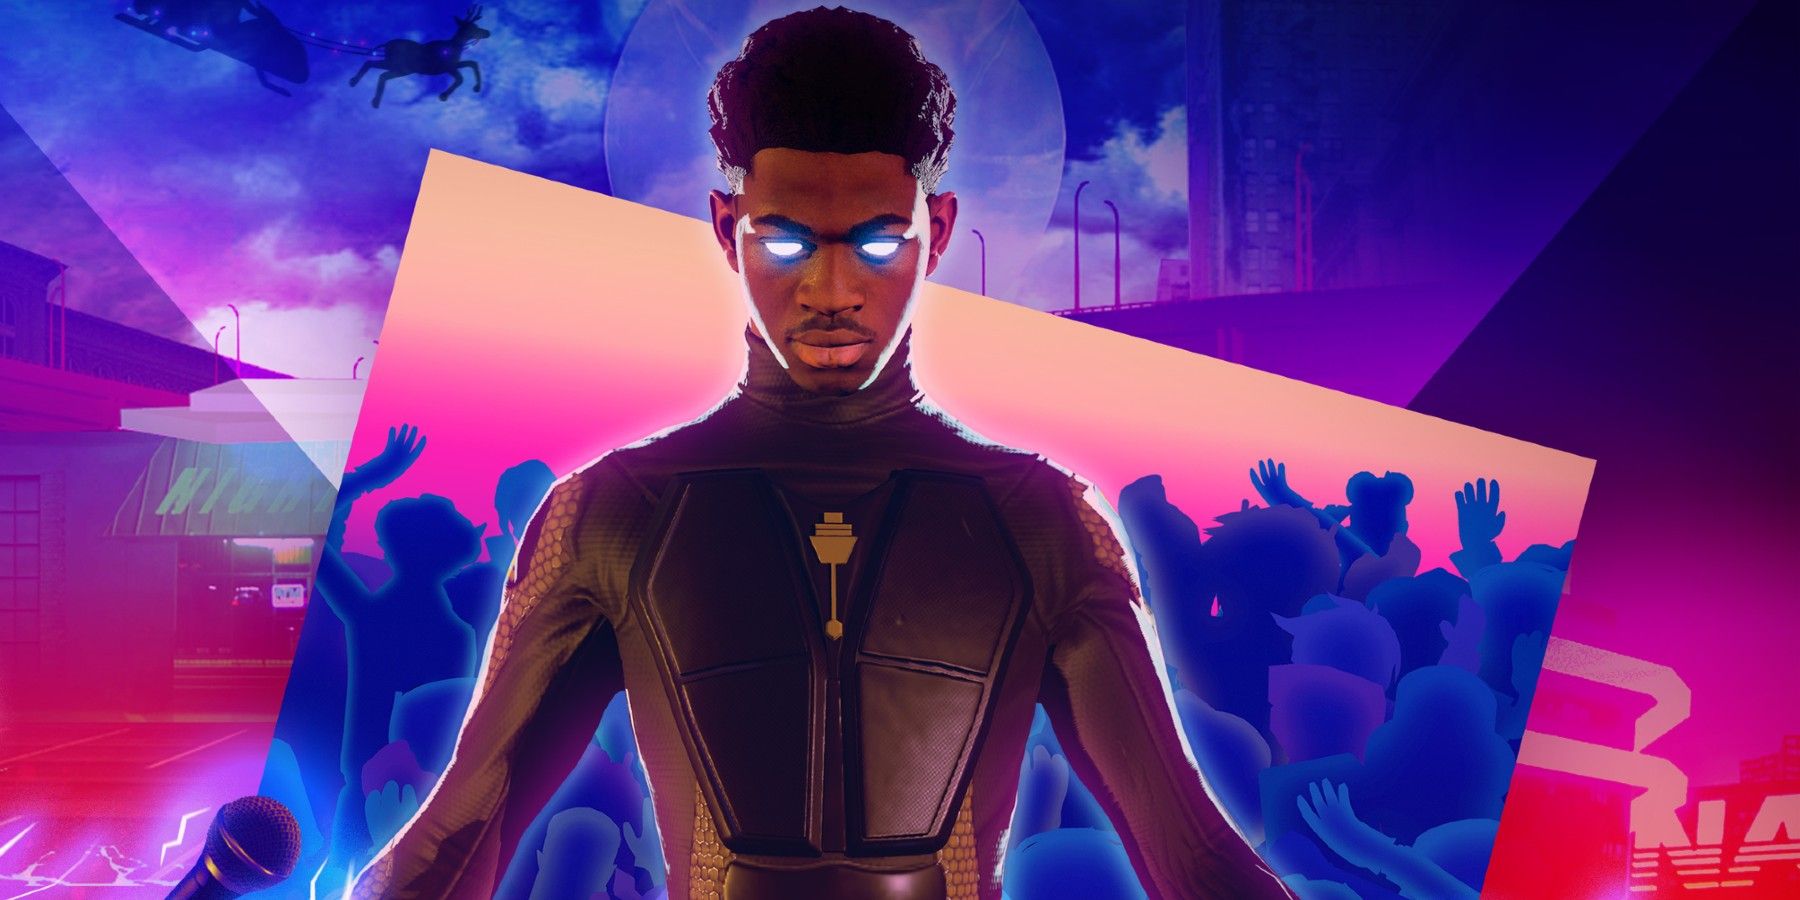 Roblox Books Lil Nas X For Fortnite Style In Game Concert Experience - roblox character events